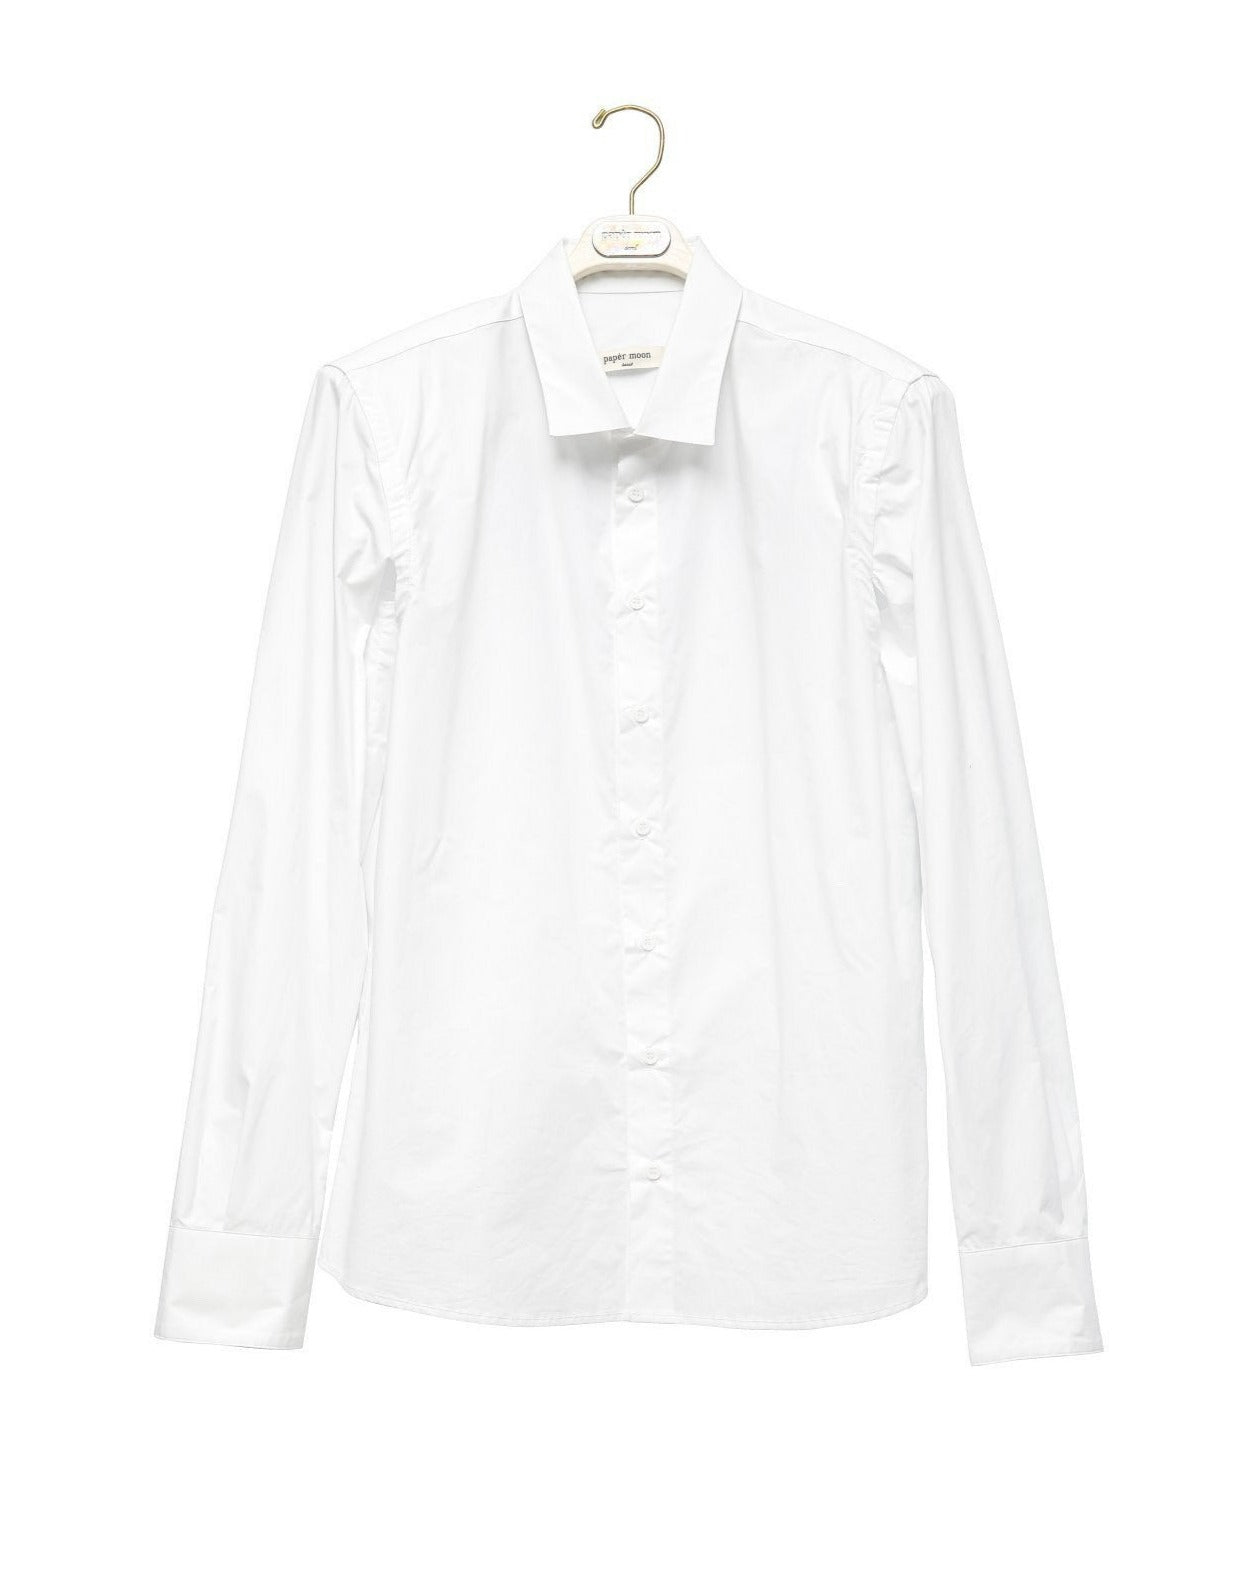 【PAPERMOON ペーパームーン】SS / Classic Padded Shoulder Cut Out Detail Button Down Shirt